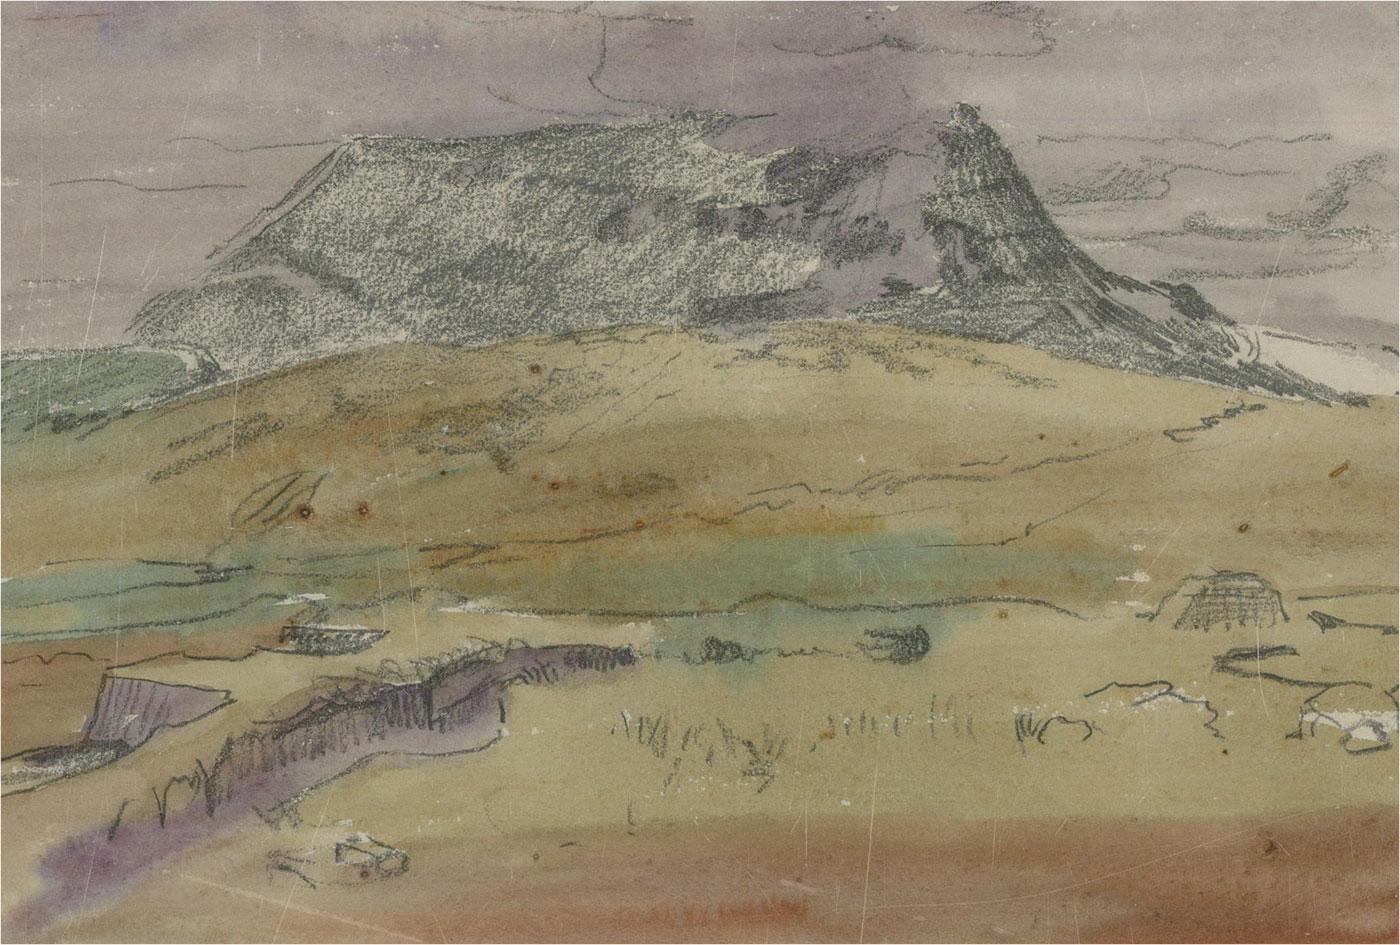 A delicate landscape study by William Monk RE (1863-1937). His delicate brushwork and natural colours are expertly applied to the surface, with washes of watercolour layered on top of graphite to create a depth and perspective in the composition.